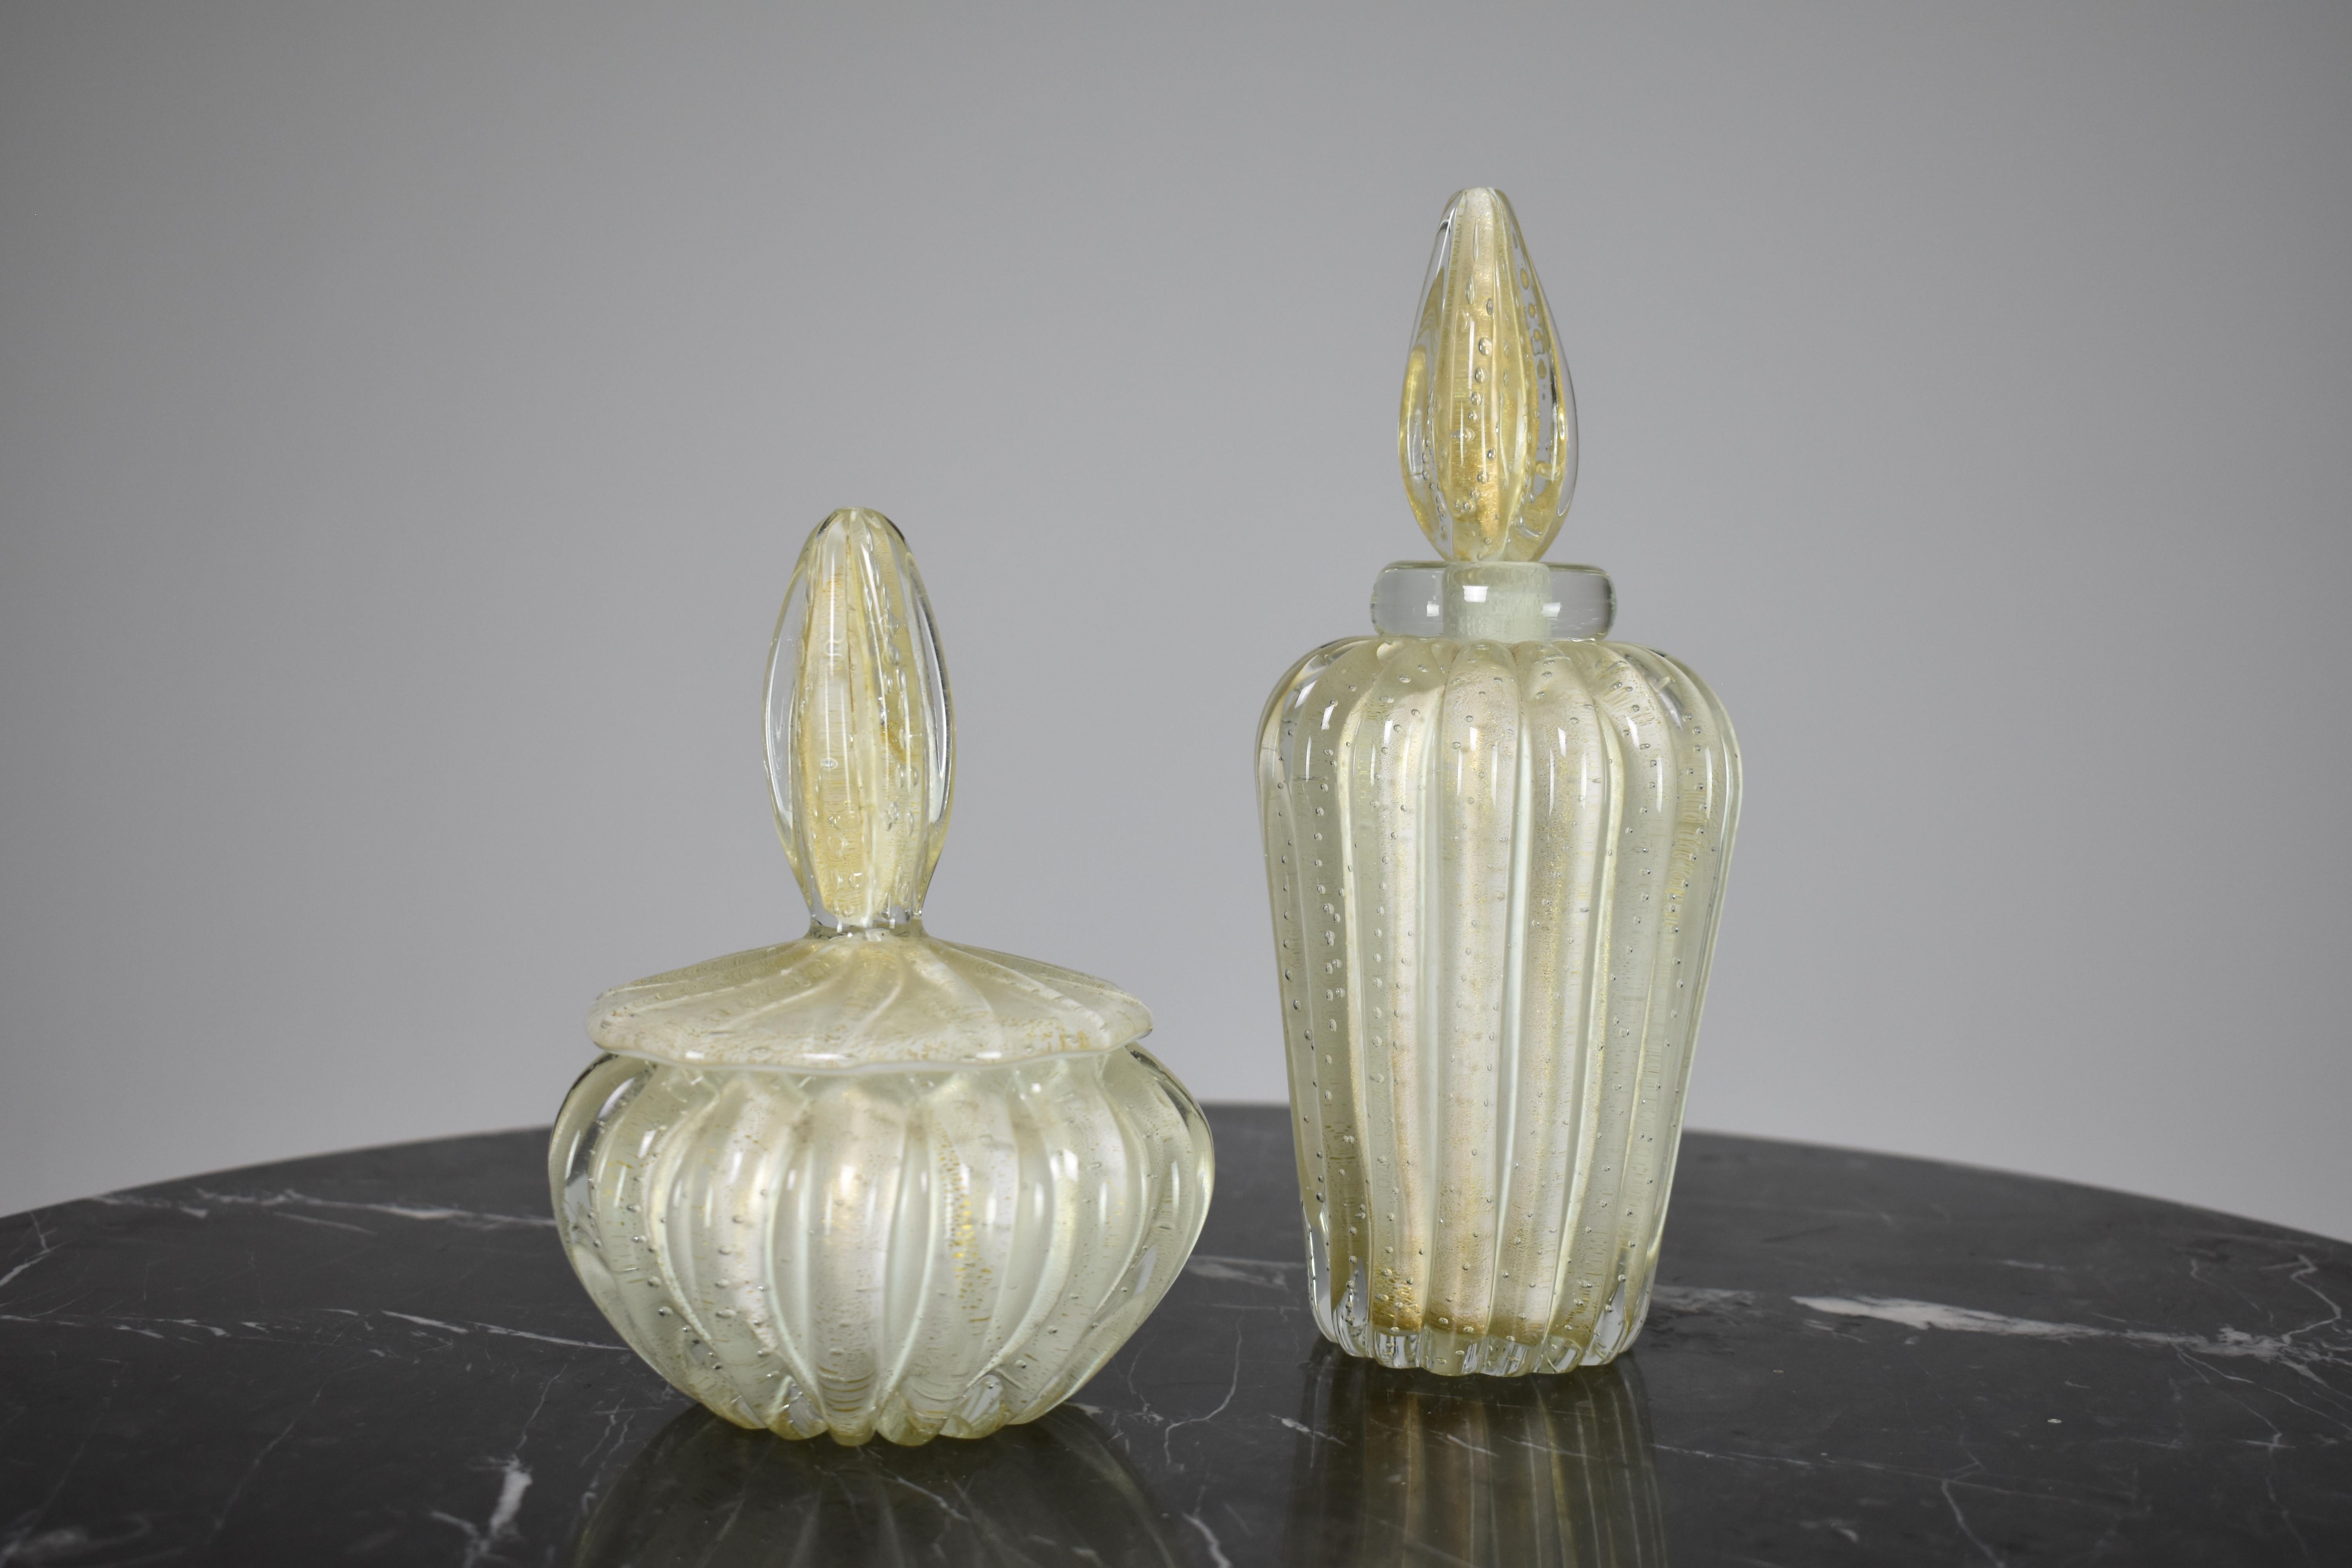 
A set of two perfume and powder decanters handblown in Italian Murano glass and designed by the important Alfredo Barbini. This exquisite collectable set is white with bubbled glass effects and gold specks. Will make a great decorative addition to